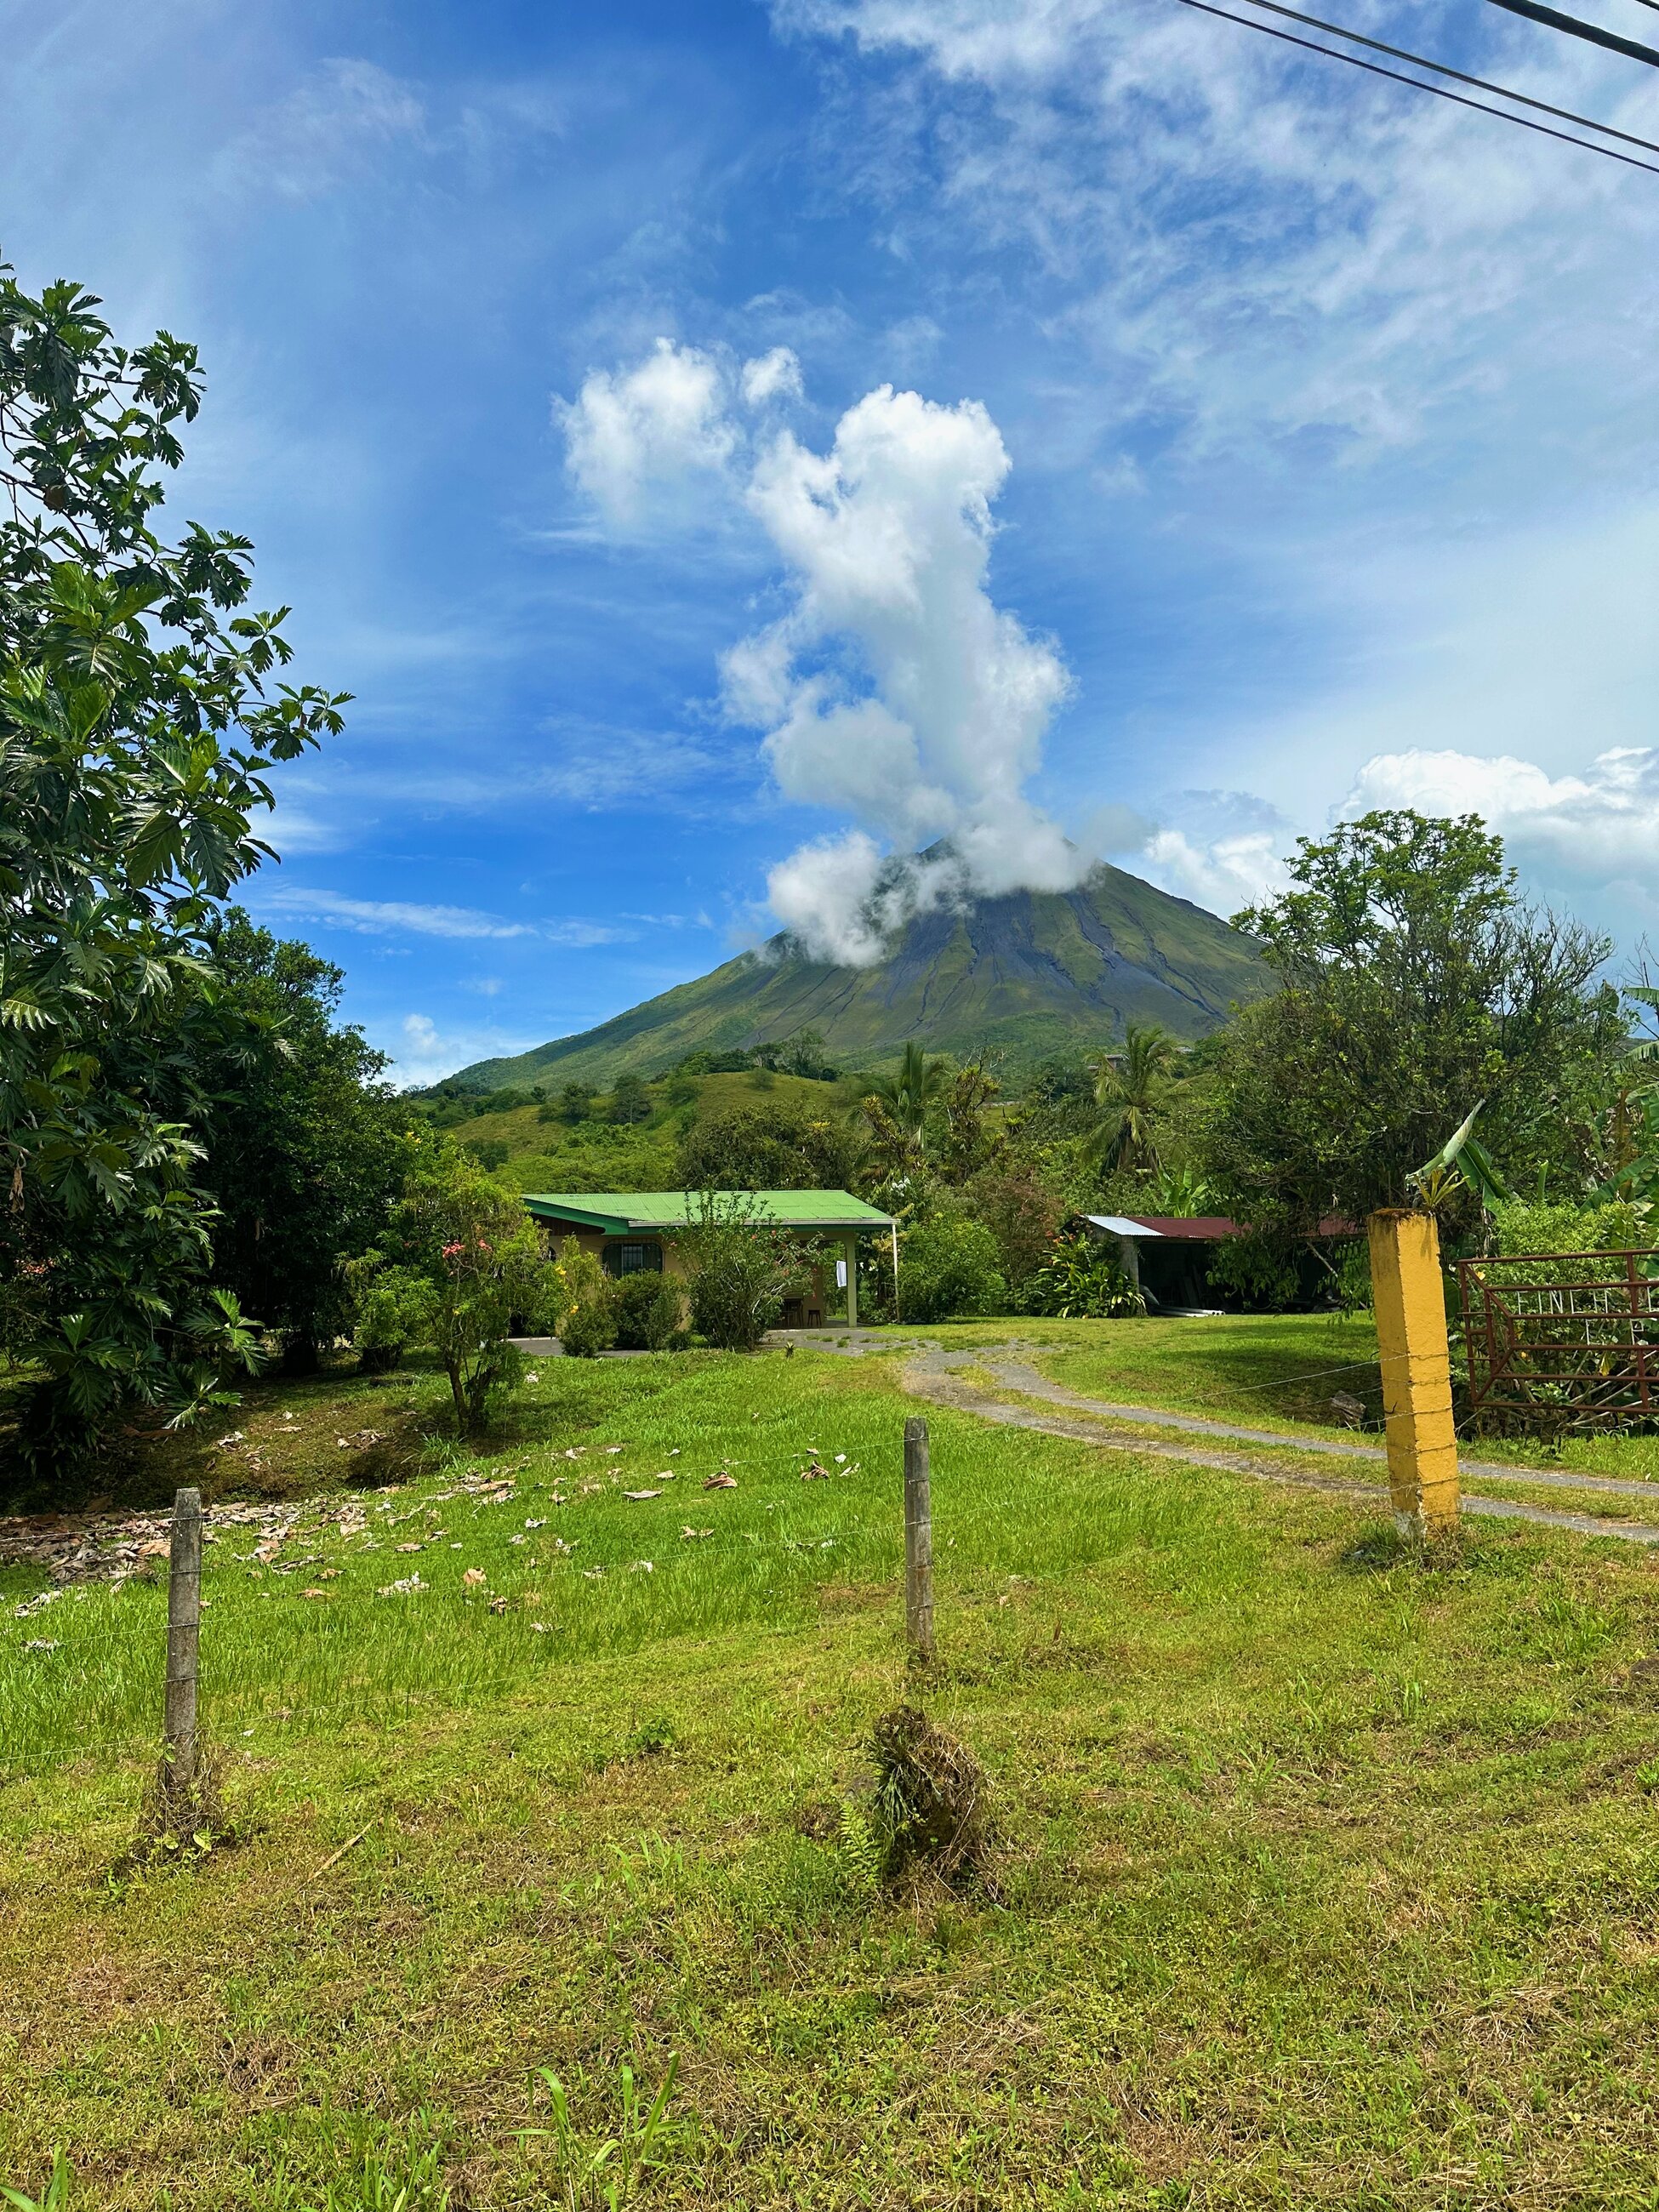 Arenal volcano on a clear day, so beautiful 